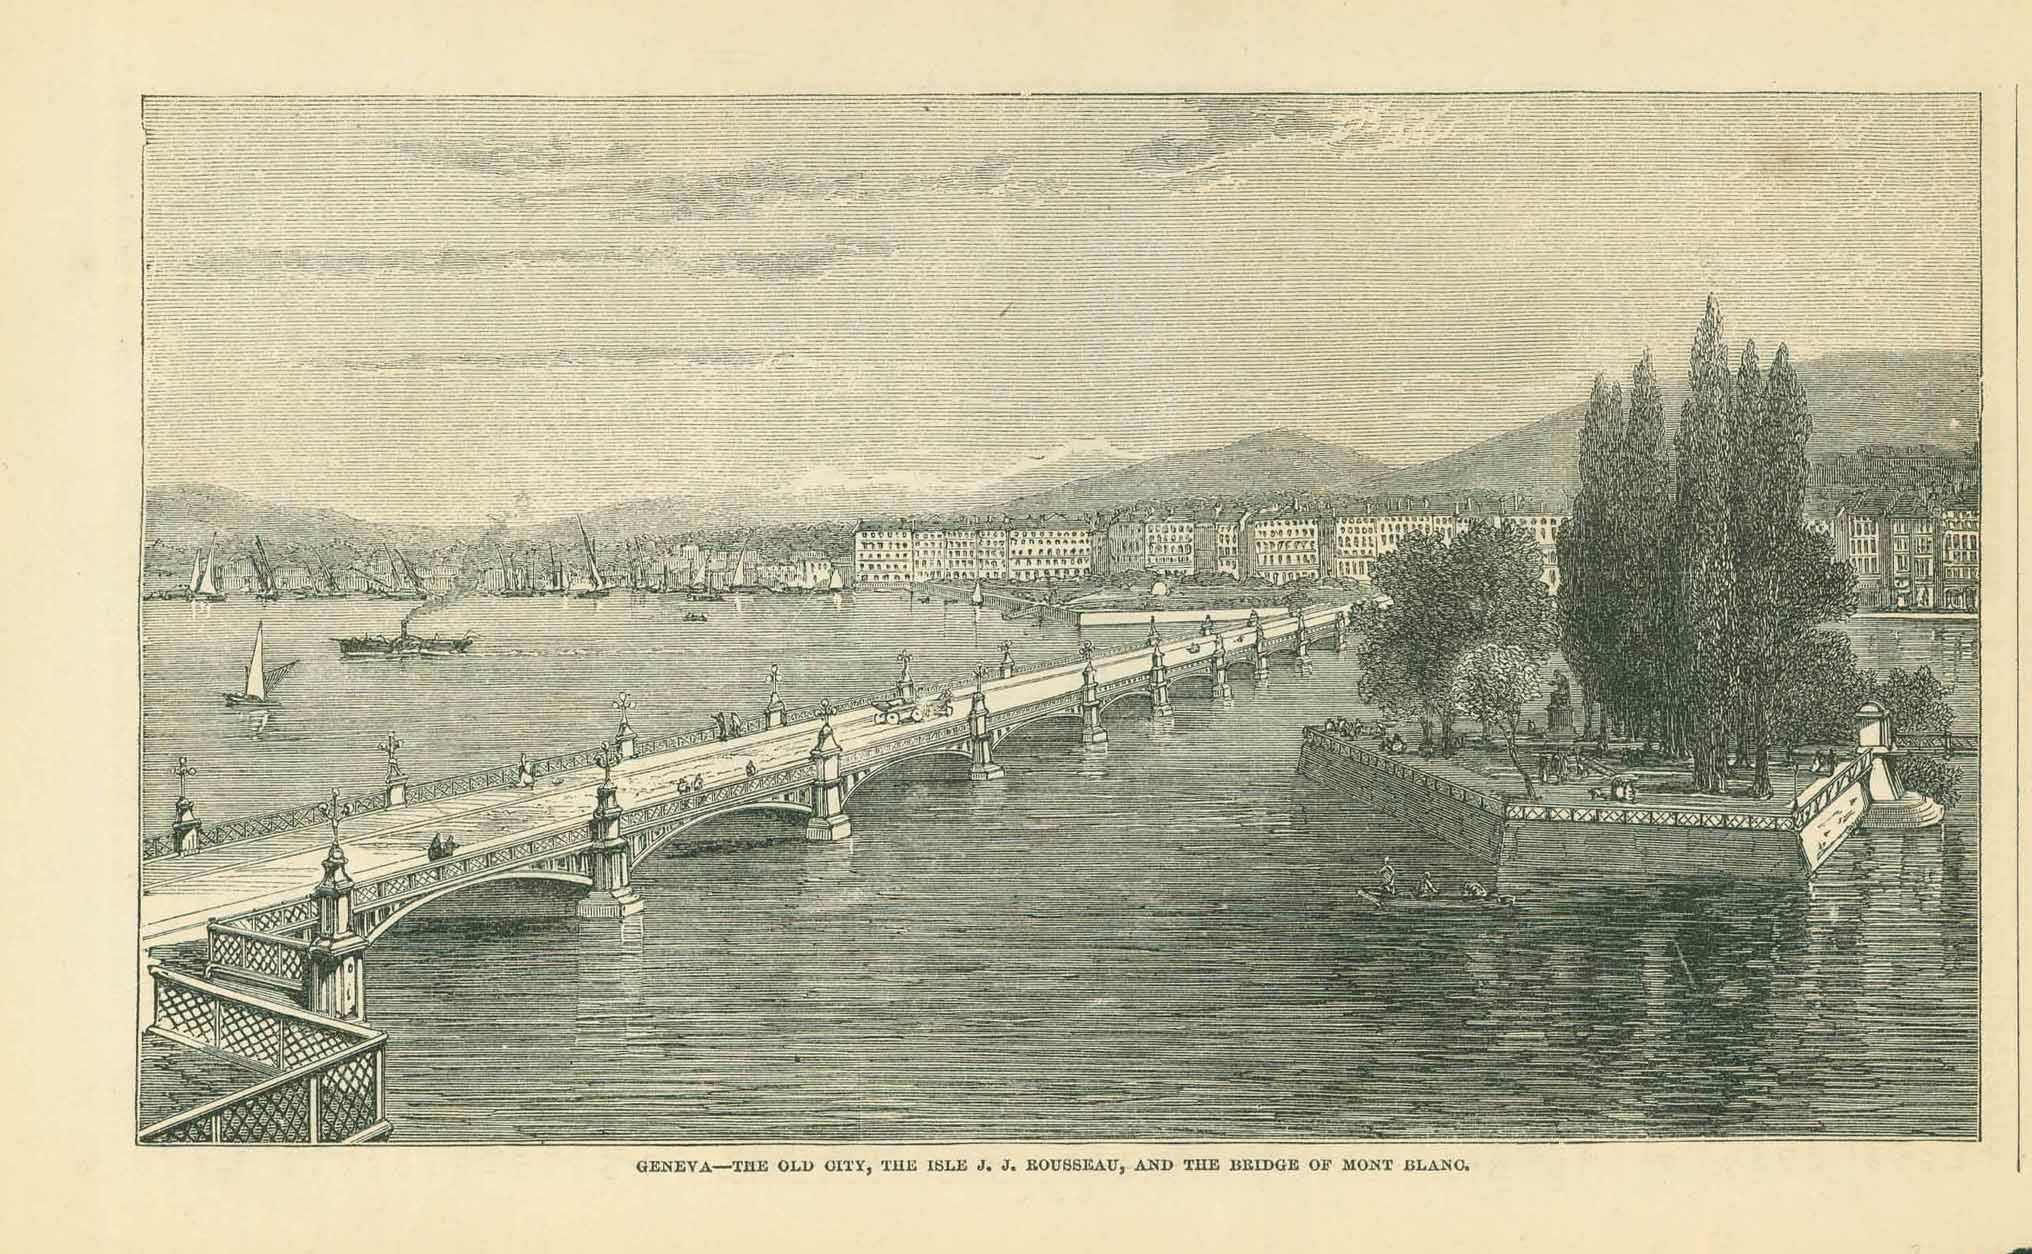 Original antique print  Switzerland, Geneva, Genf, Geneva - The Old City, The Isle J. J. Rousseau, And The Bridge of Mount Blano"  Wood engraving published 1872. On the reverse side is an image of the Old City with the Granerie de LeRoy.